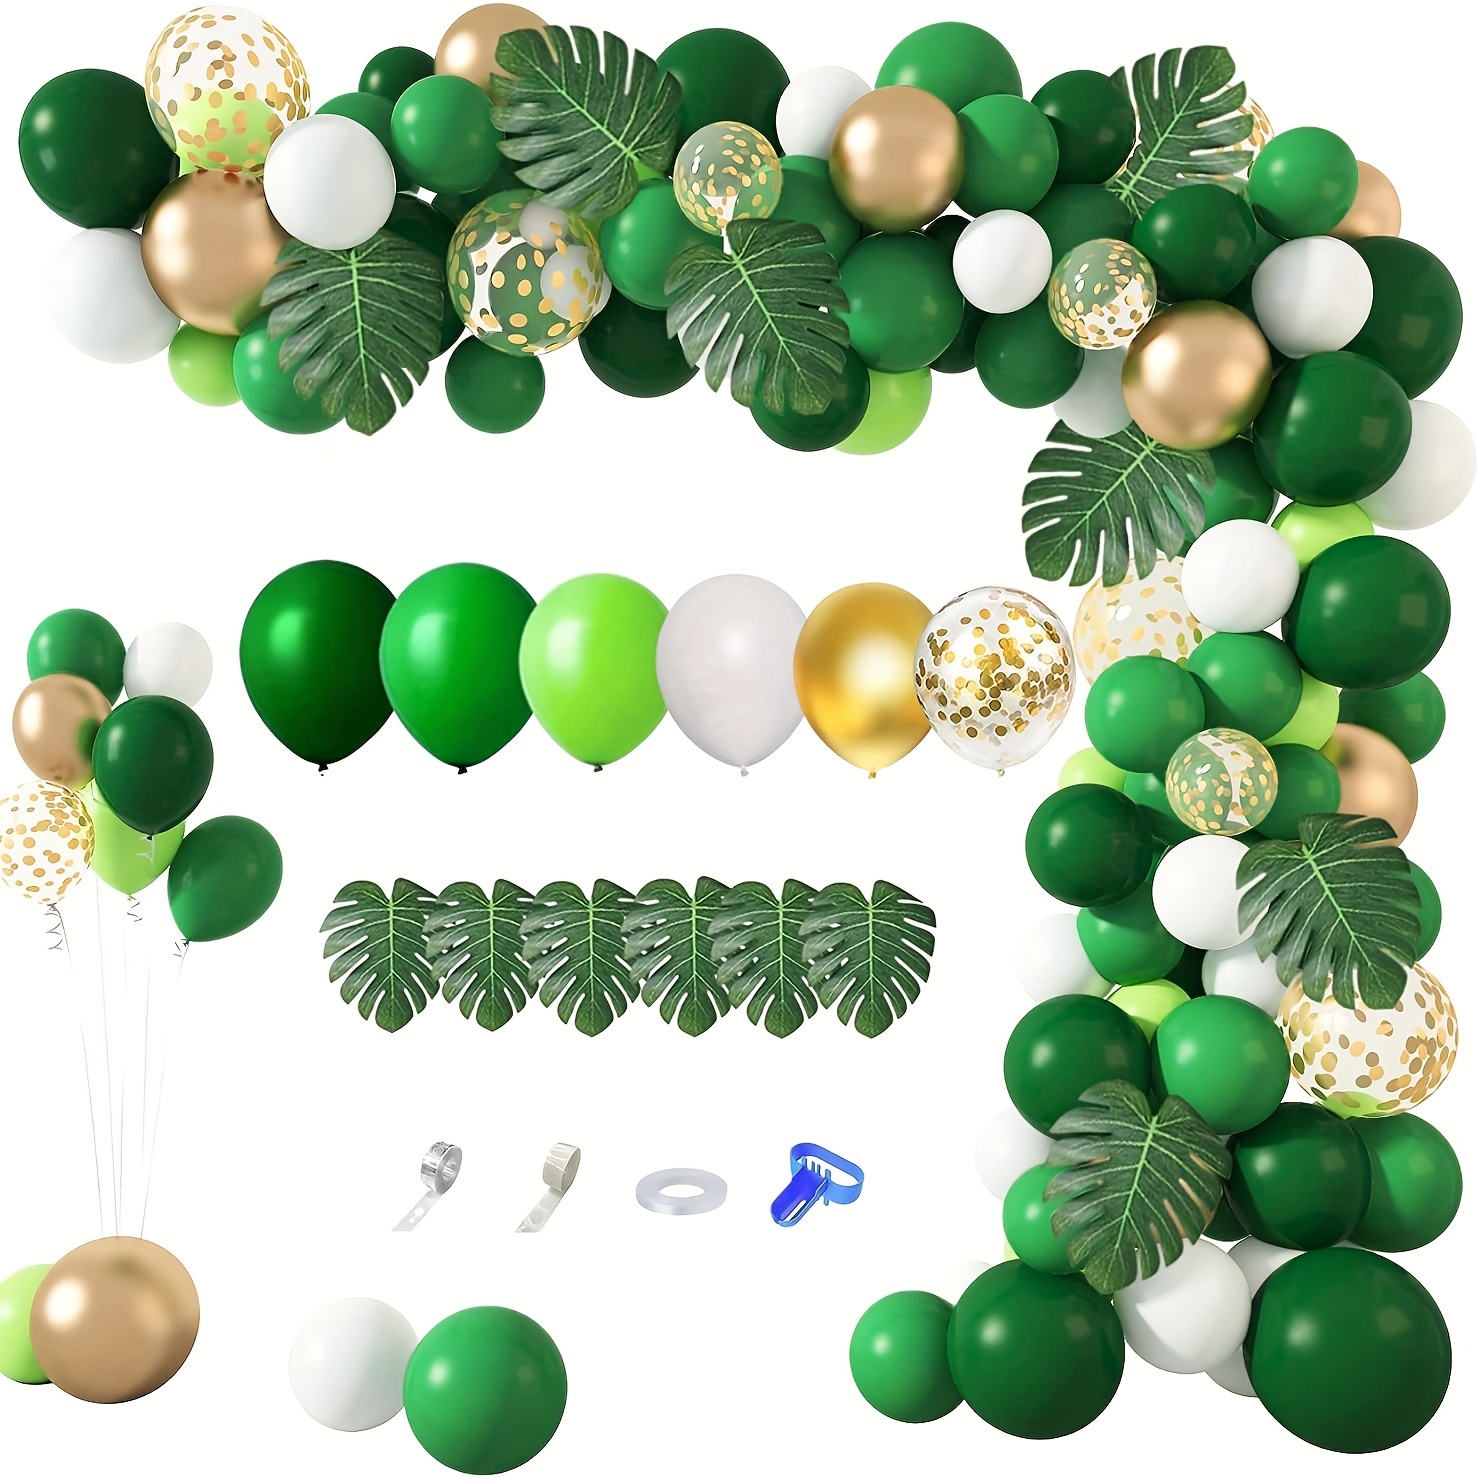 

140pcs Jungle Party Balloons Garland Arch Kit, Golden Green Balloons Dinosaur Party Decoration With Palm Leaves For Safari Animal Wild 1 Birthday Party Supplies Easter Gift